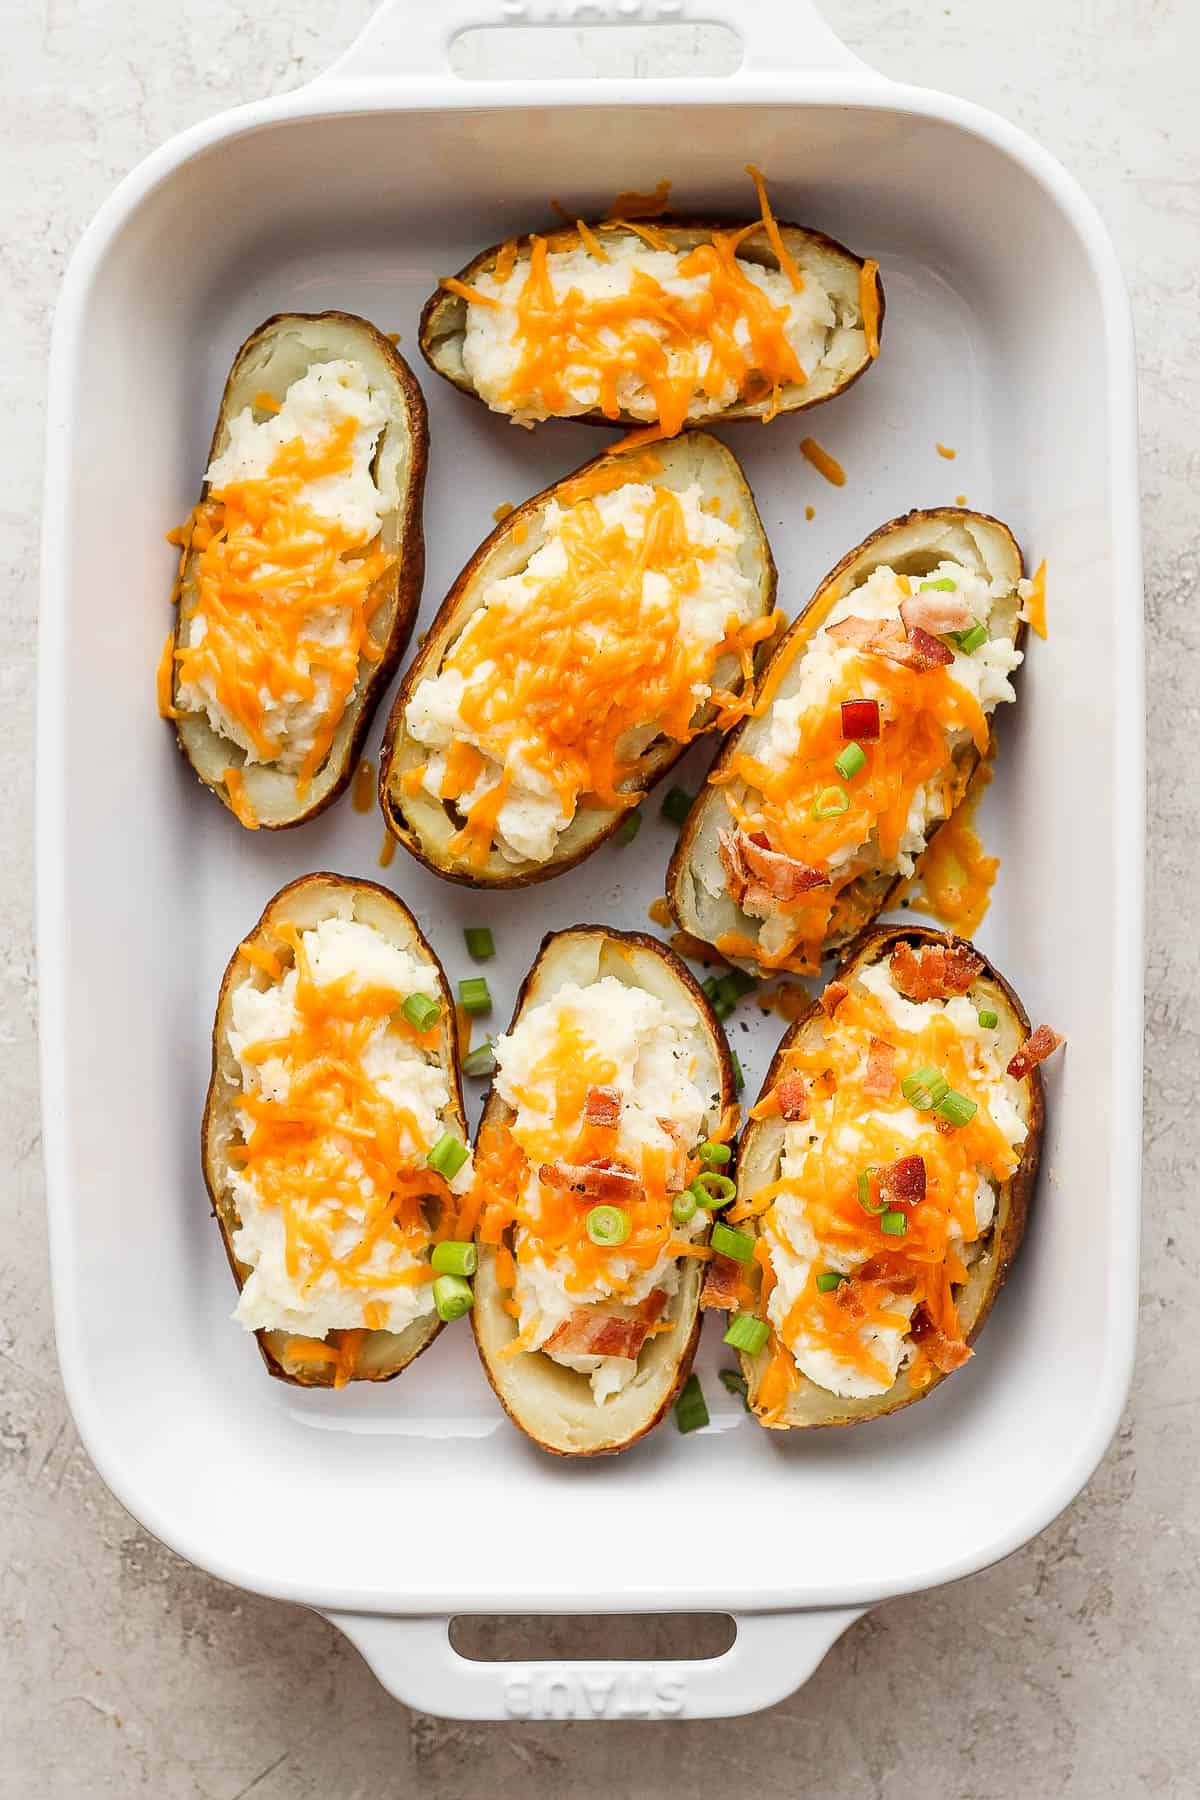 Twice baked potatoes in a large baking dish with some toppings added.